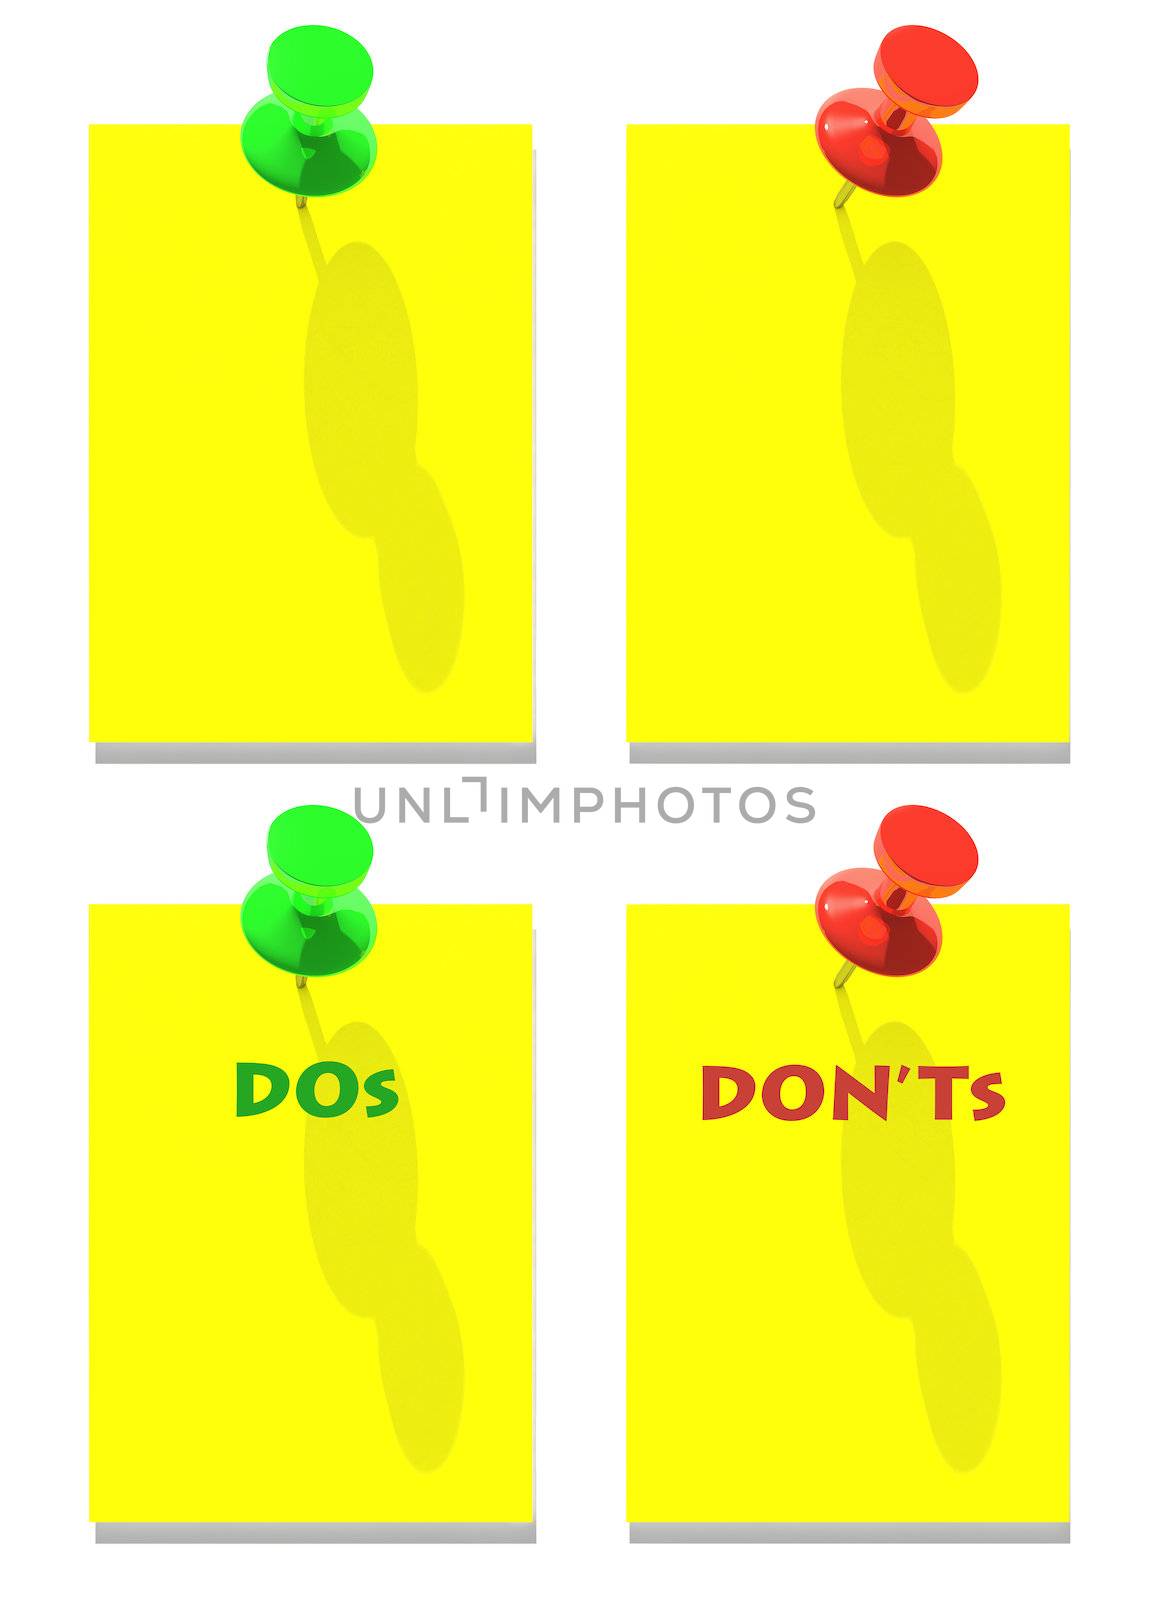 DOs and DON'Ts green red pins by gorgrigo